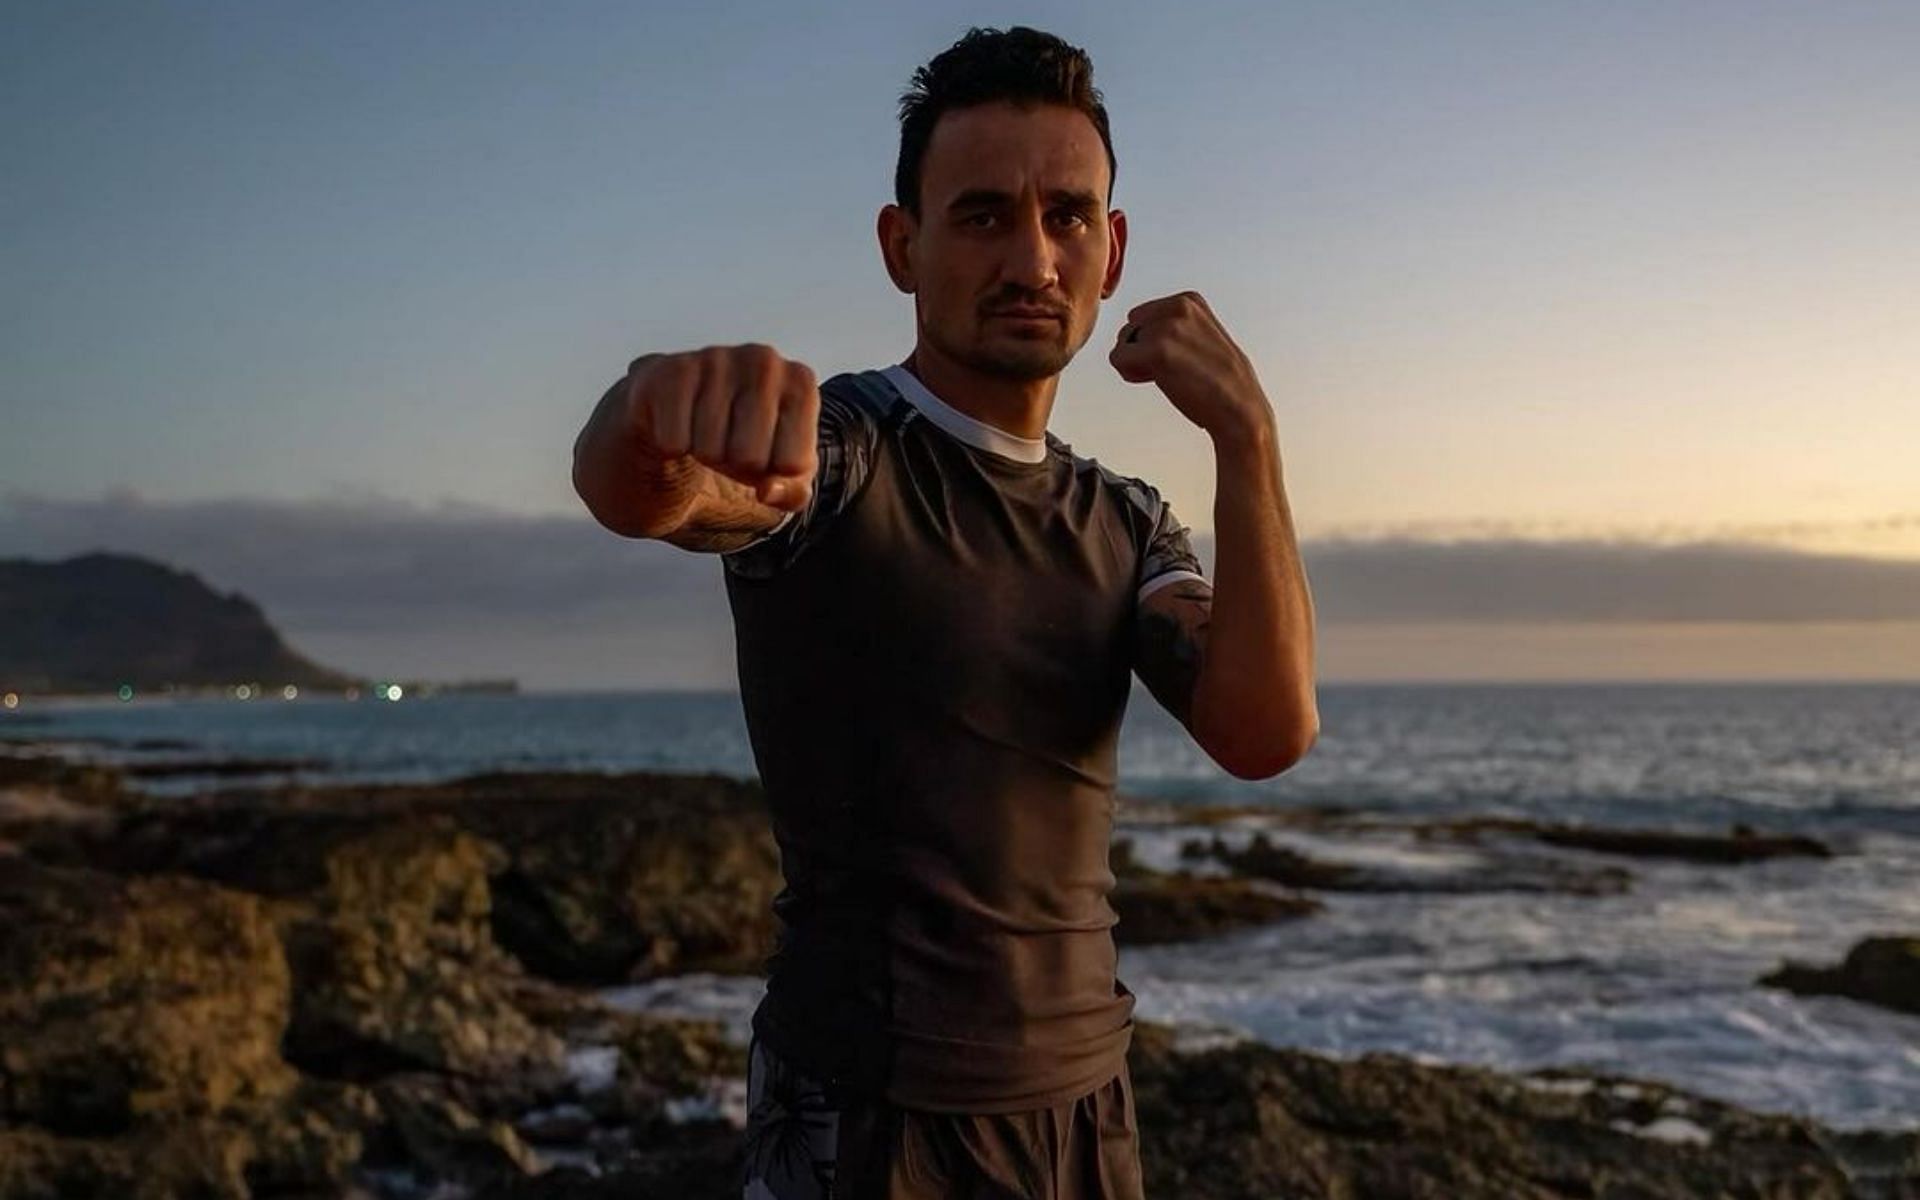 &quot;Max Holloway shares insights on his experience training at lightweight and reflects on his 2019 loss to Dustin Poirier